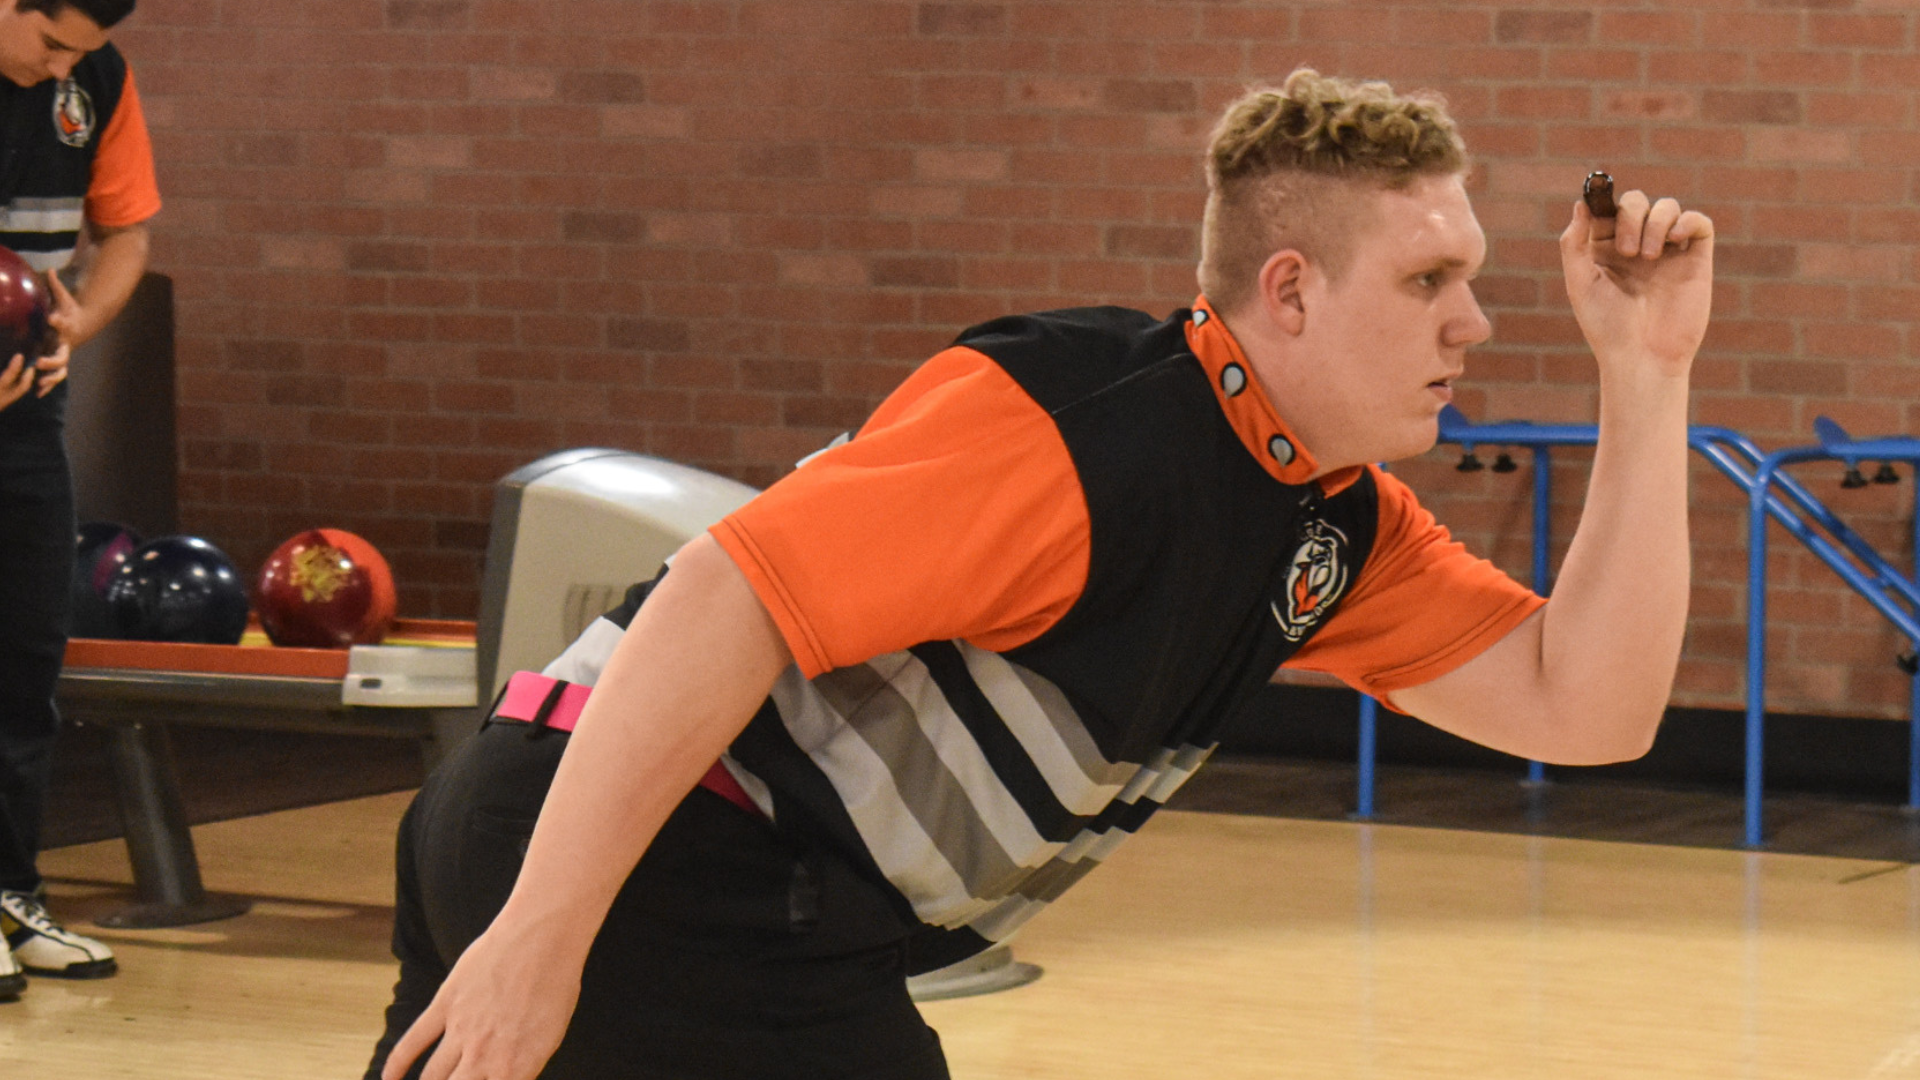 Union men’s bowling recap from the Orange and Black Tournaments